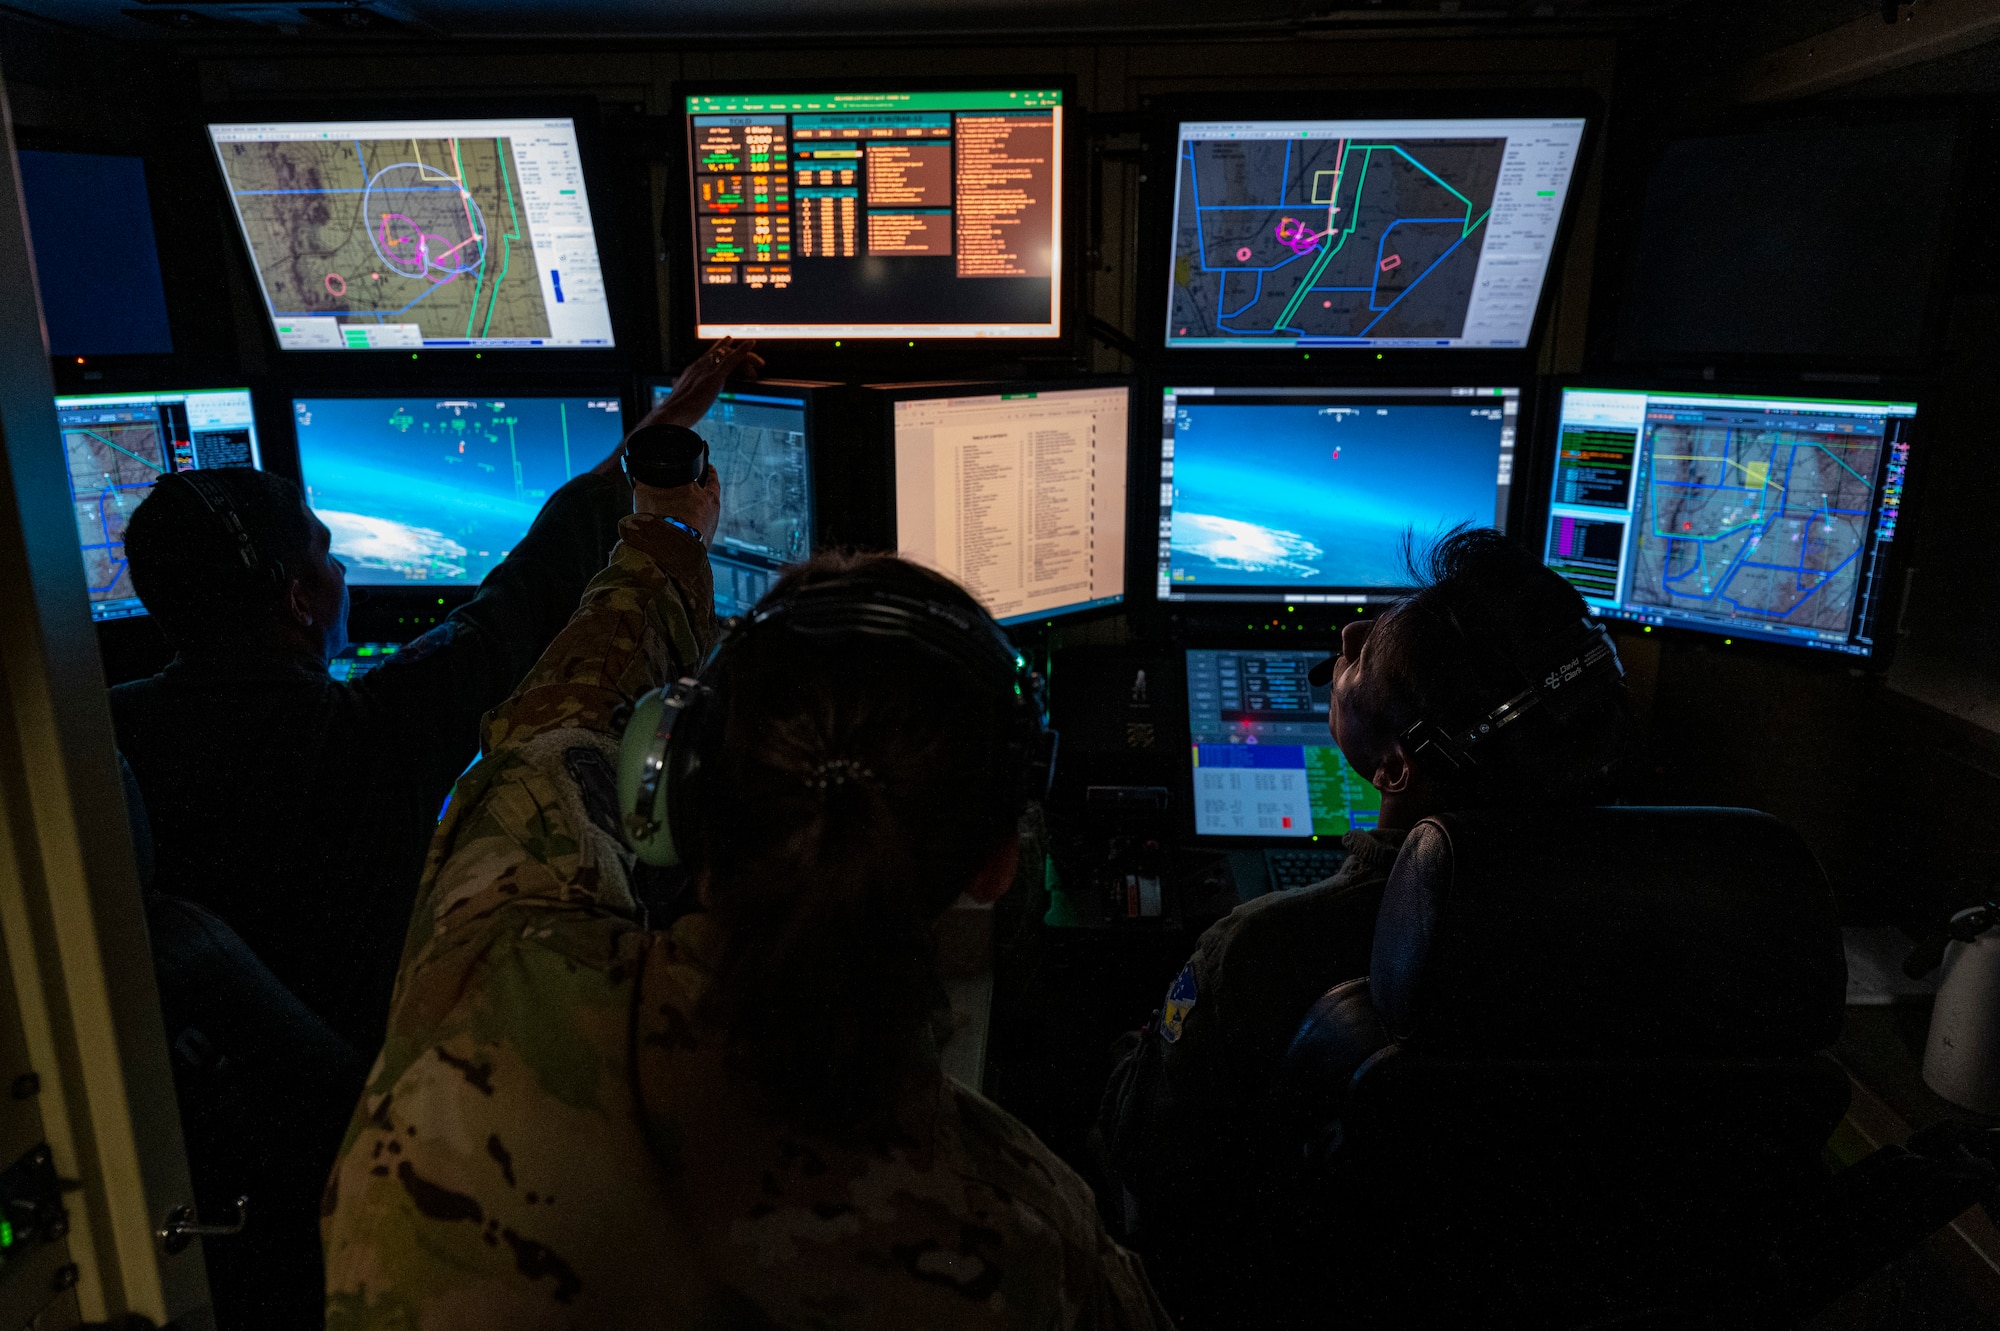 U.S. Air Force Maj. Ashley Meyer, 6th Attack Squadron MQ-9 Reaper instructor pilot, assists U.S. Air Force 2nd Lt. Cristino Garcia, MQ-9 Reaper student pilot, and U.S. Air Force Airman Tenzin Dongak, MQ-9 Reaper student sensor operator, during a training flight in a ground control station, Holloman Air Force Base, New Mexico, Oct. 13, 2022. The 6th ATKS trains both pilots and sensor operators to maintain peak efficiency when operating an MQ-9. (U.S. Air Force photo by Airman 1st Class Isaiah Pedrazzini)